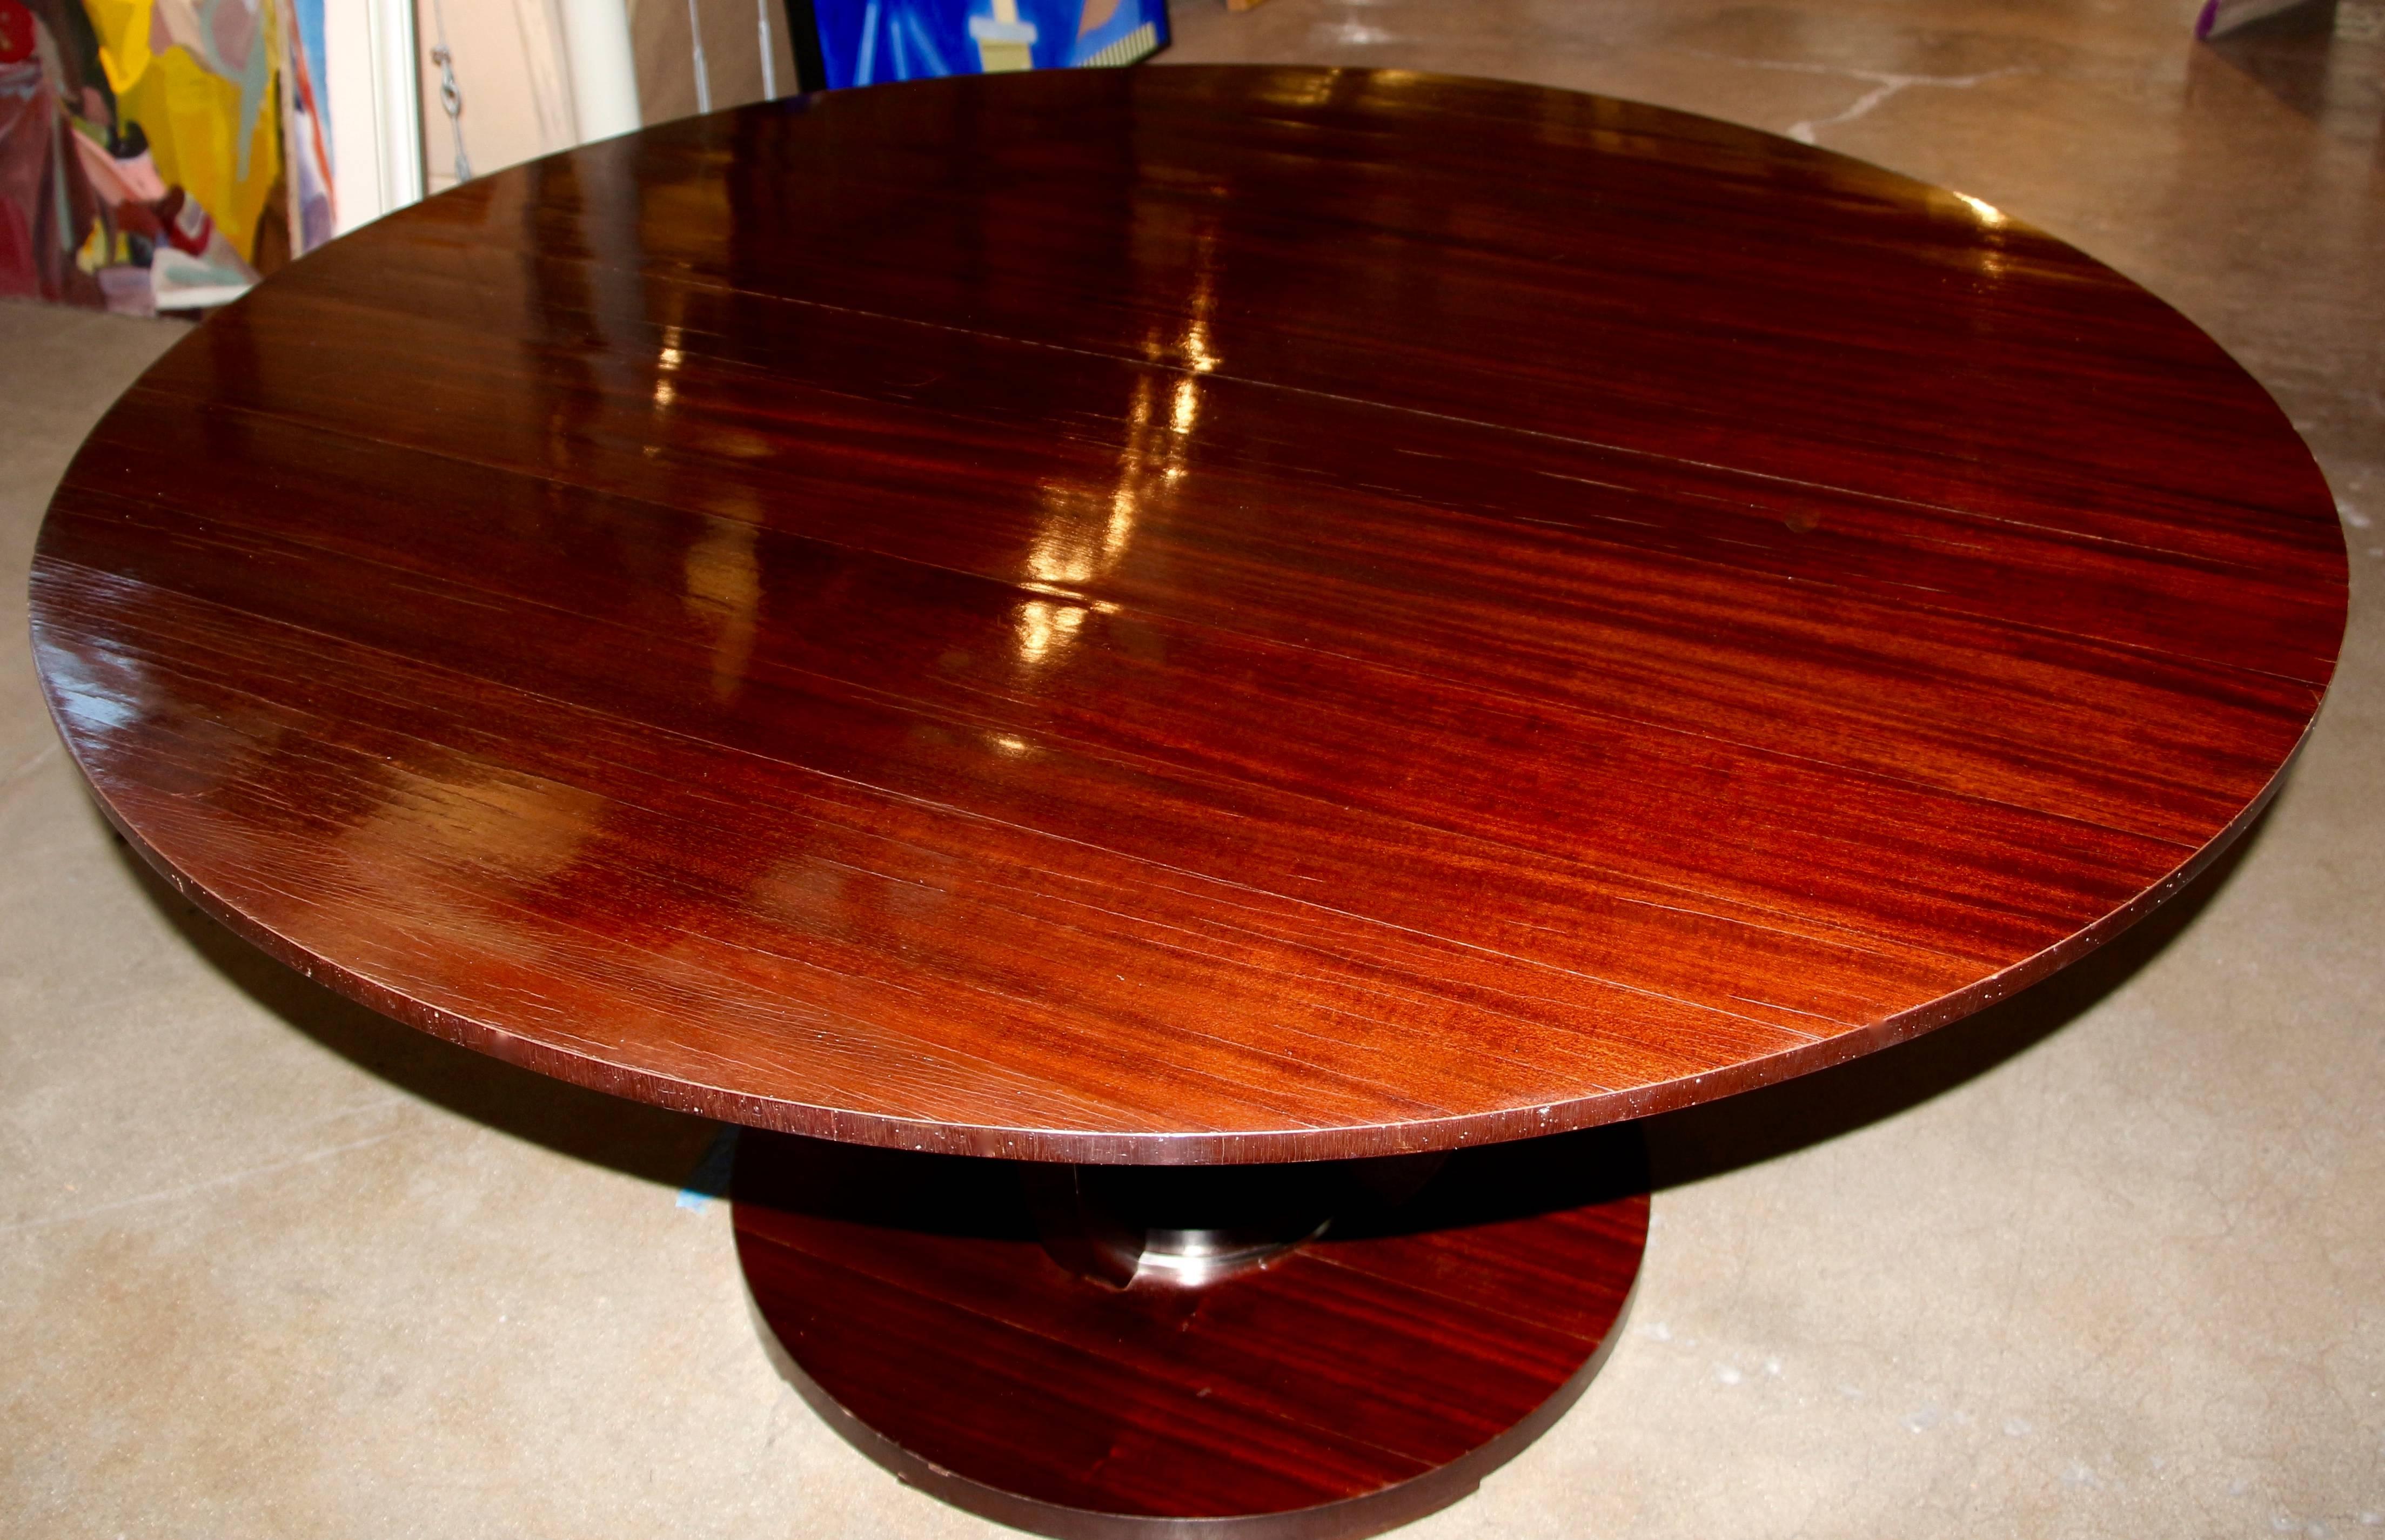 A nice Barbara Barry designed table for Baker Furniture. It features her signature raised mahogany veneer strips, which add interest and texture to the top. Base features four supports, with Chrome or still accents on the base. Unfortunately on of